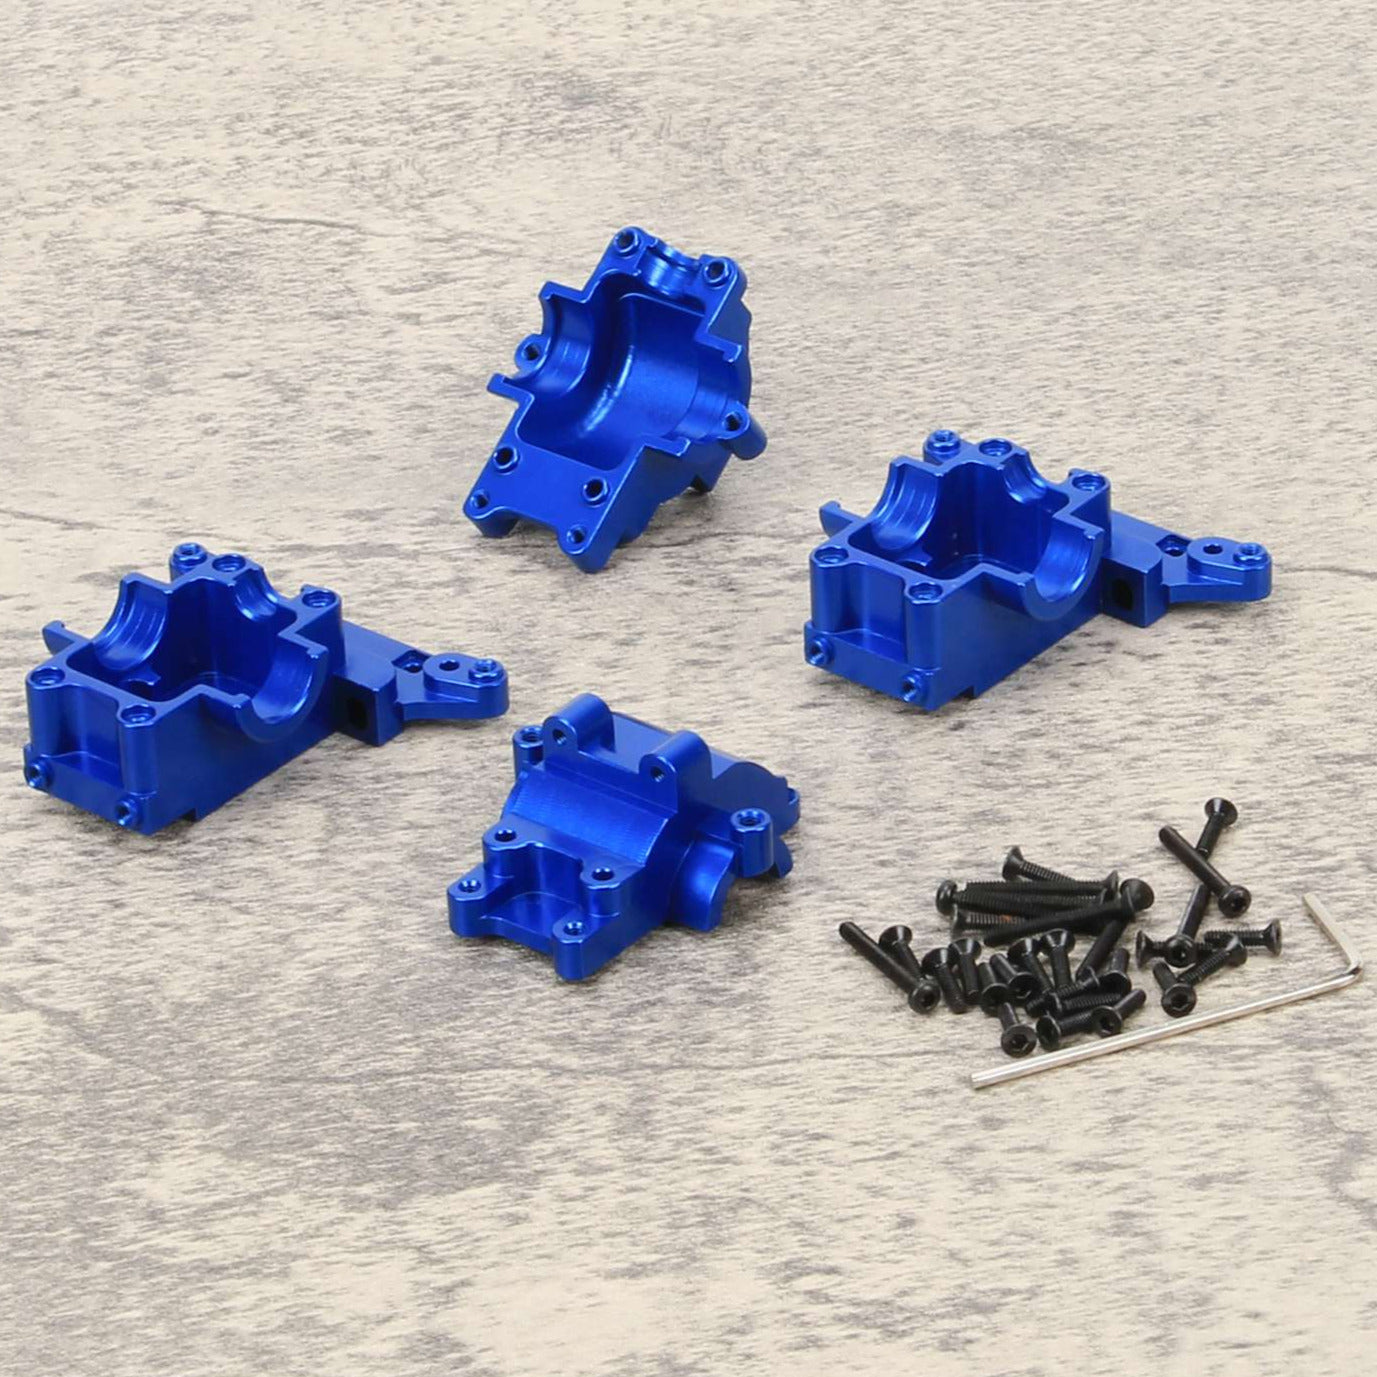 RCAWD REDCAT GEN8 Blue / Two Set RCAWD Alloy Differential Housing for 1/18 Traxxas Upgrade Parts